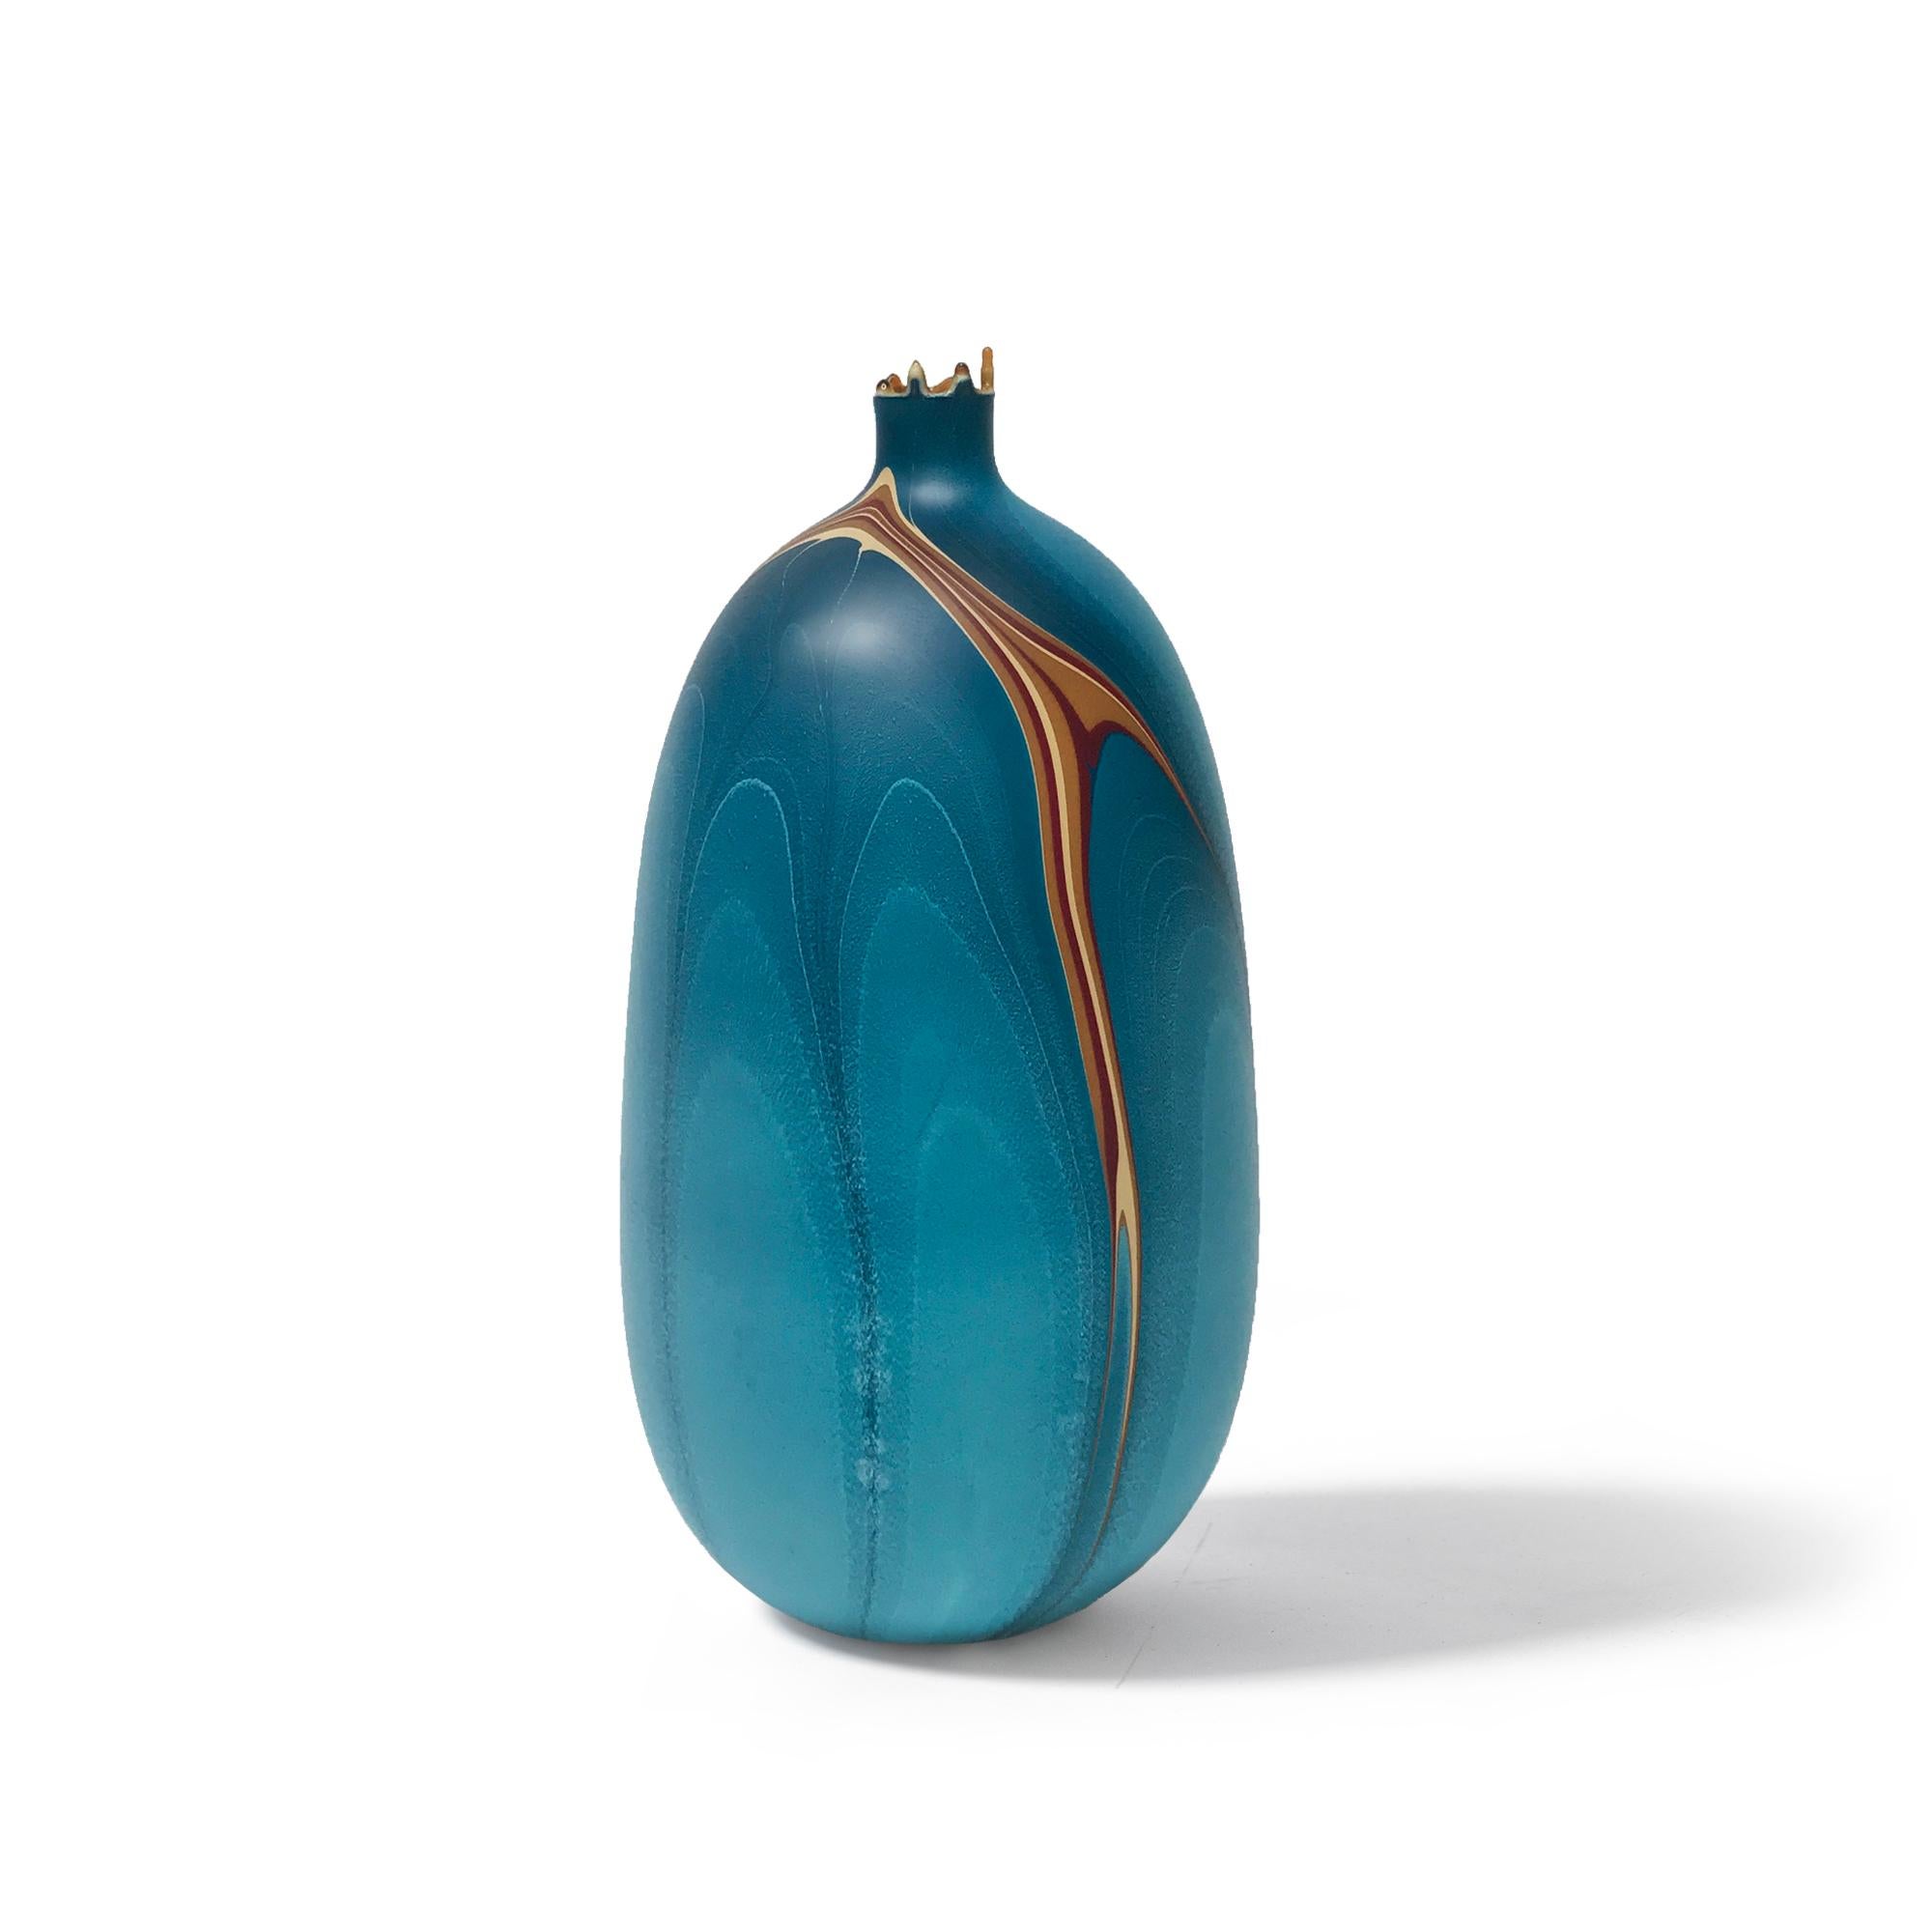 Nile Oblong hydro vase by Elyse Graham.
Dimensions: W 14 x D 14 x H 29 cm
Materials: plaster, resin
Molded, dyed, and finished by hand in LA. Customization.
Available.
All pieces are made to order.

Our new Hydro Vases take on a futuristic